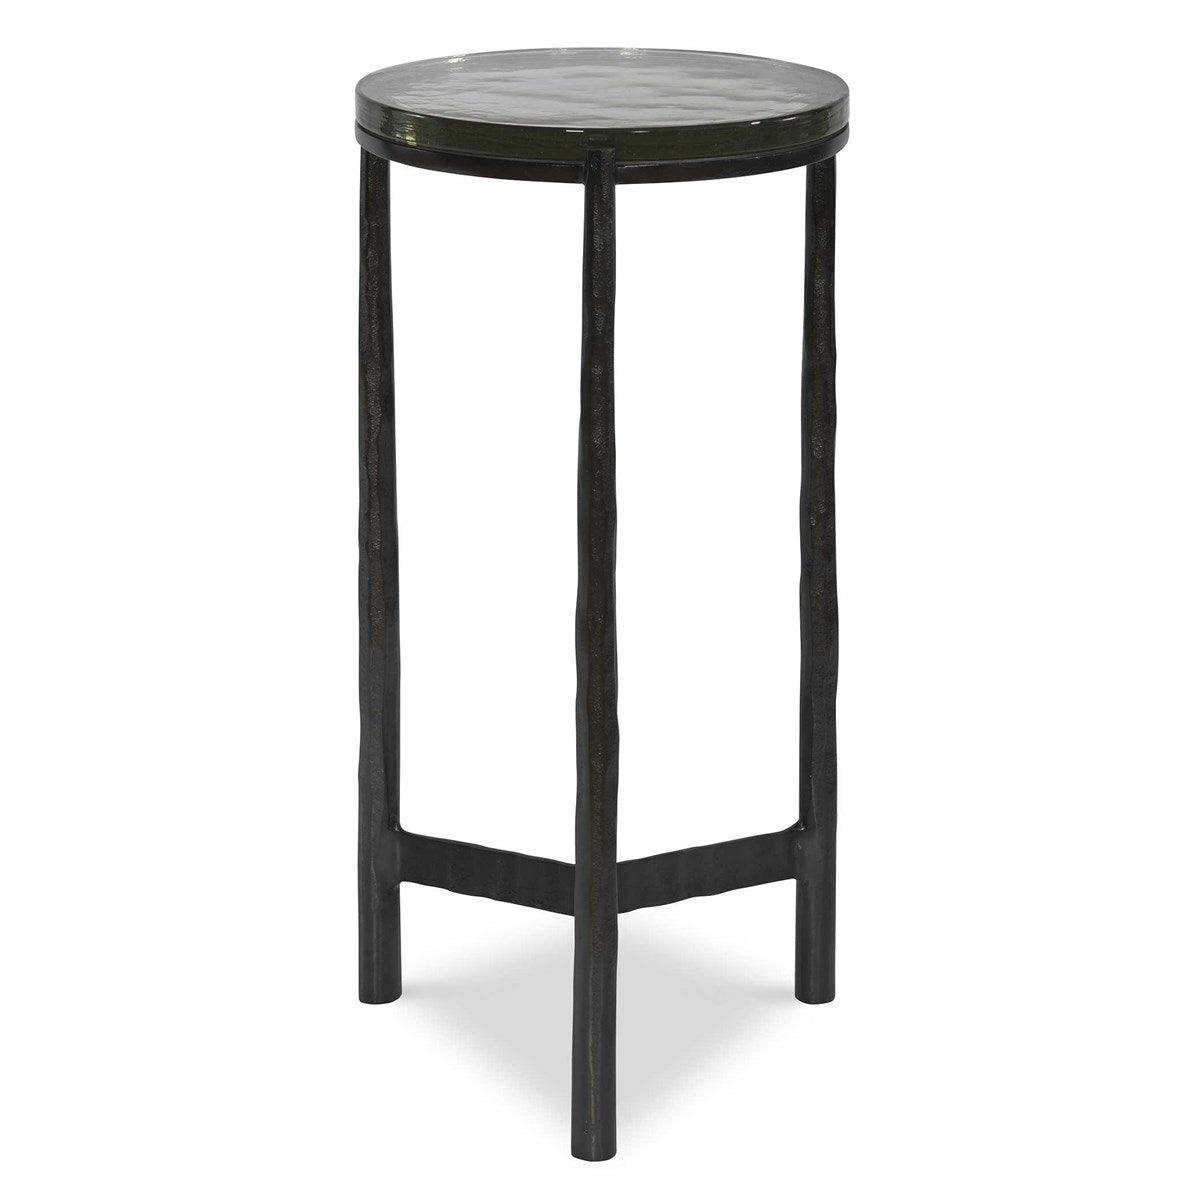 The Uttermost - Eternity Accent Table - 25308 | Montreal Lighting & Hardware